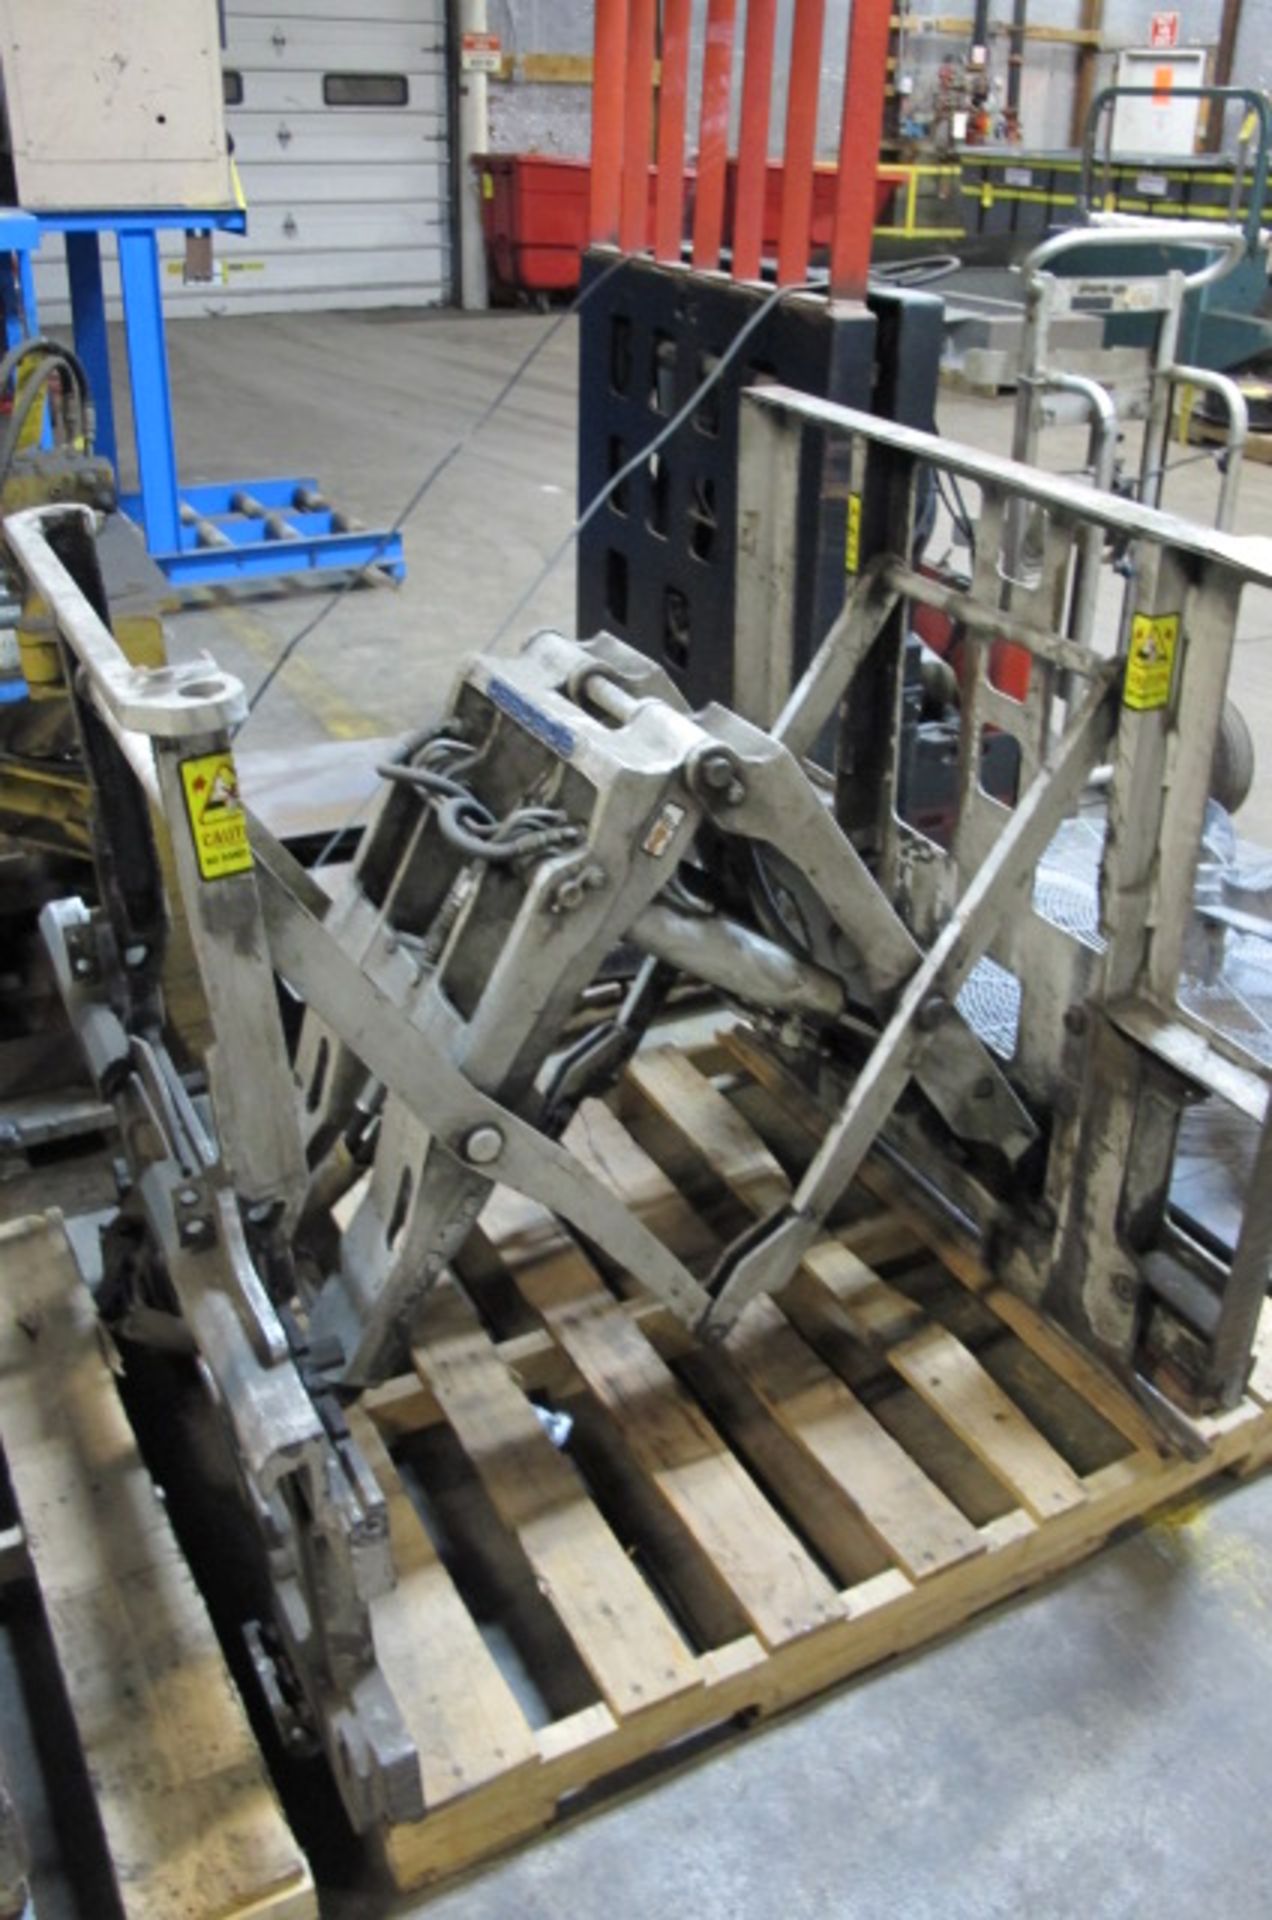 CASCADE FORK LIFT ATTACHMENT 7666 OH 120, Lyons, Ohio 43523 - all Gaylord plastic pallets are NOT